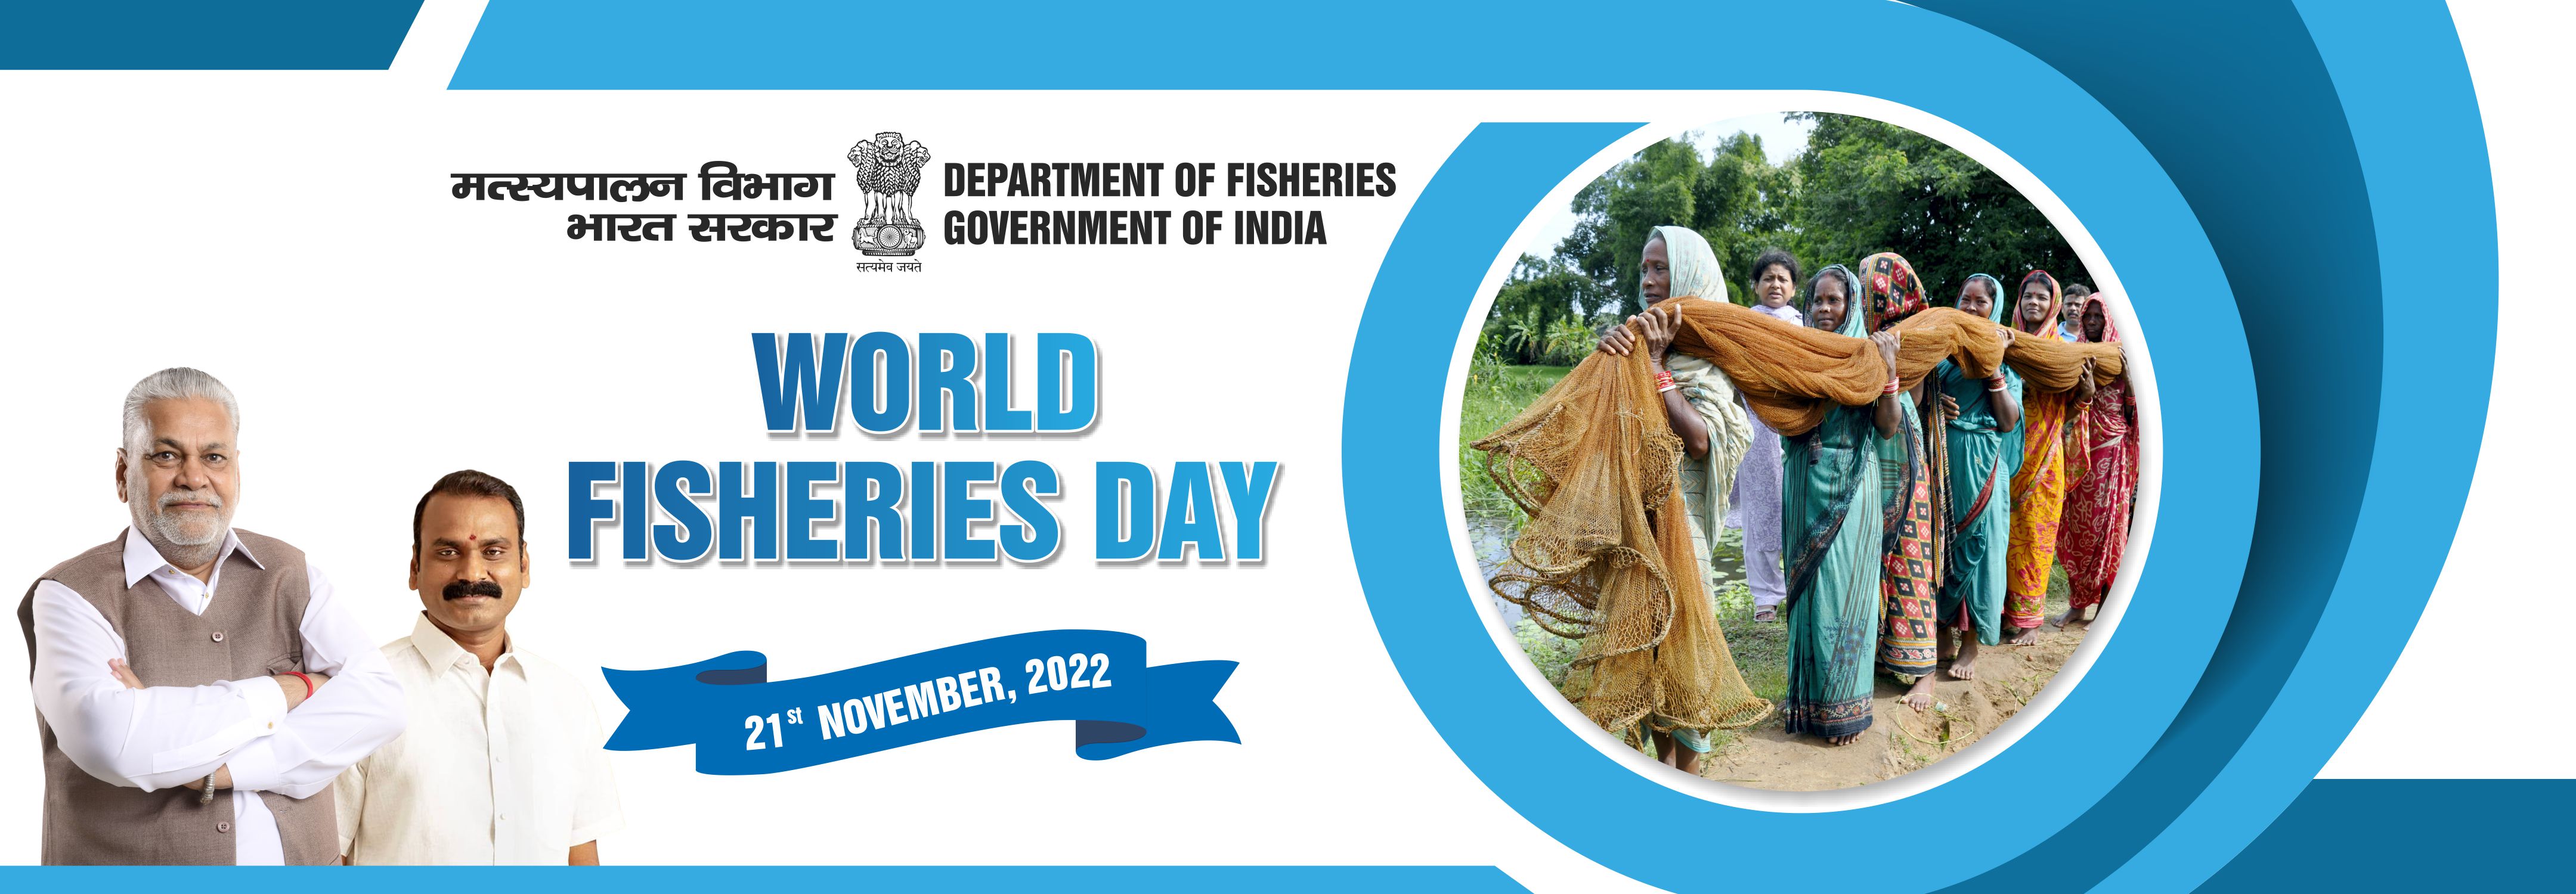 About The Department | Department of Fisheries, GoI